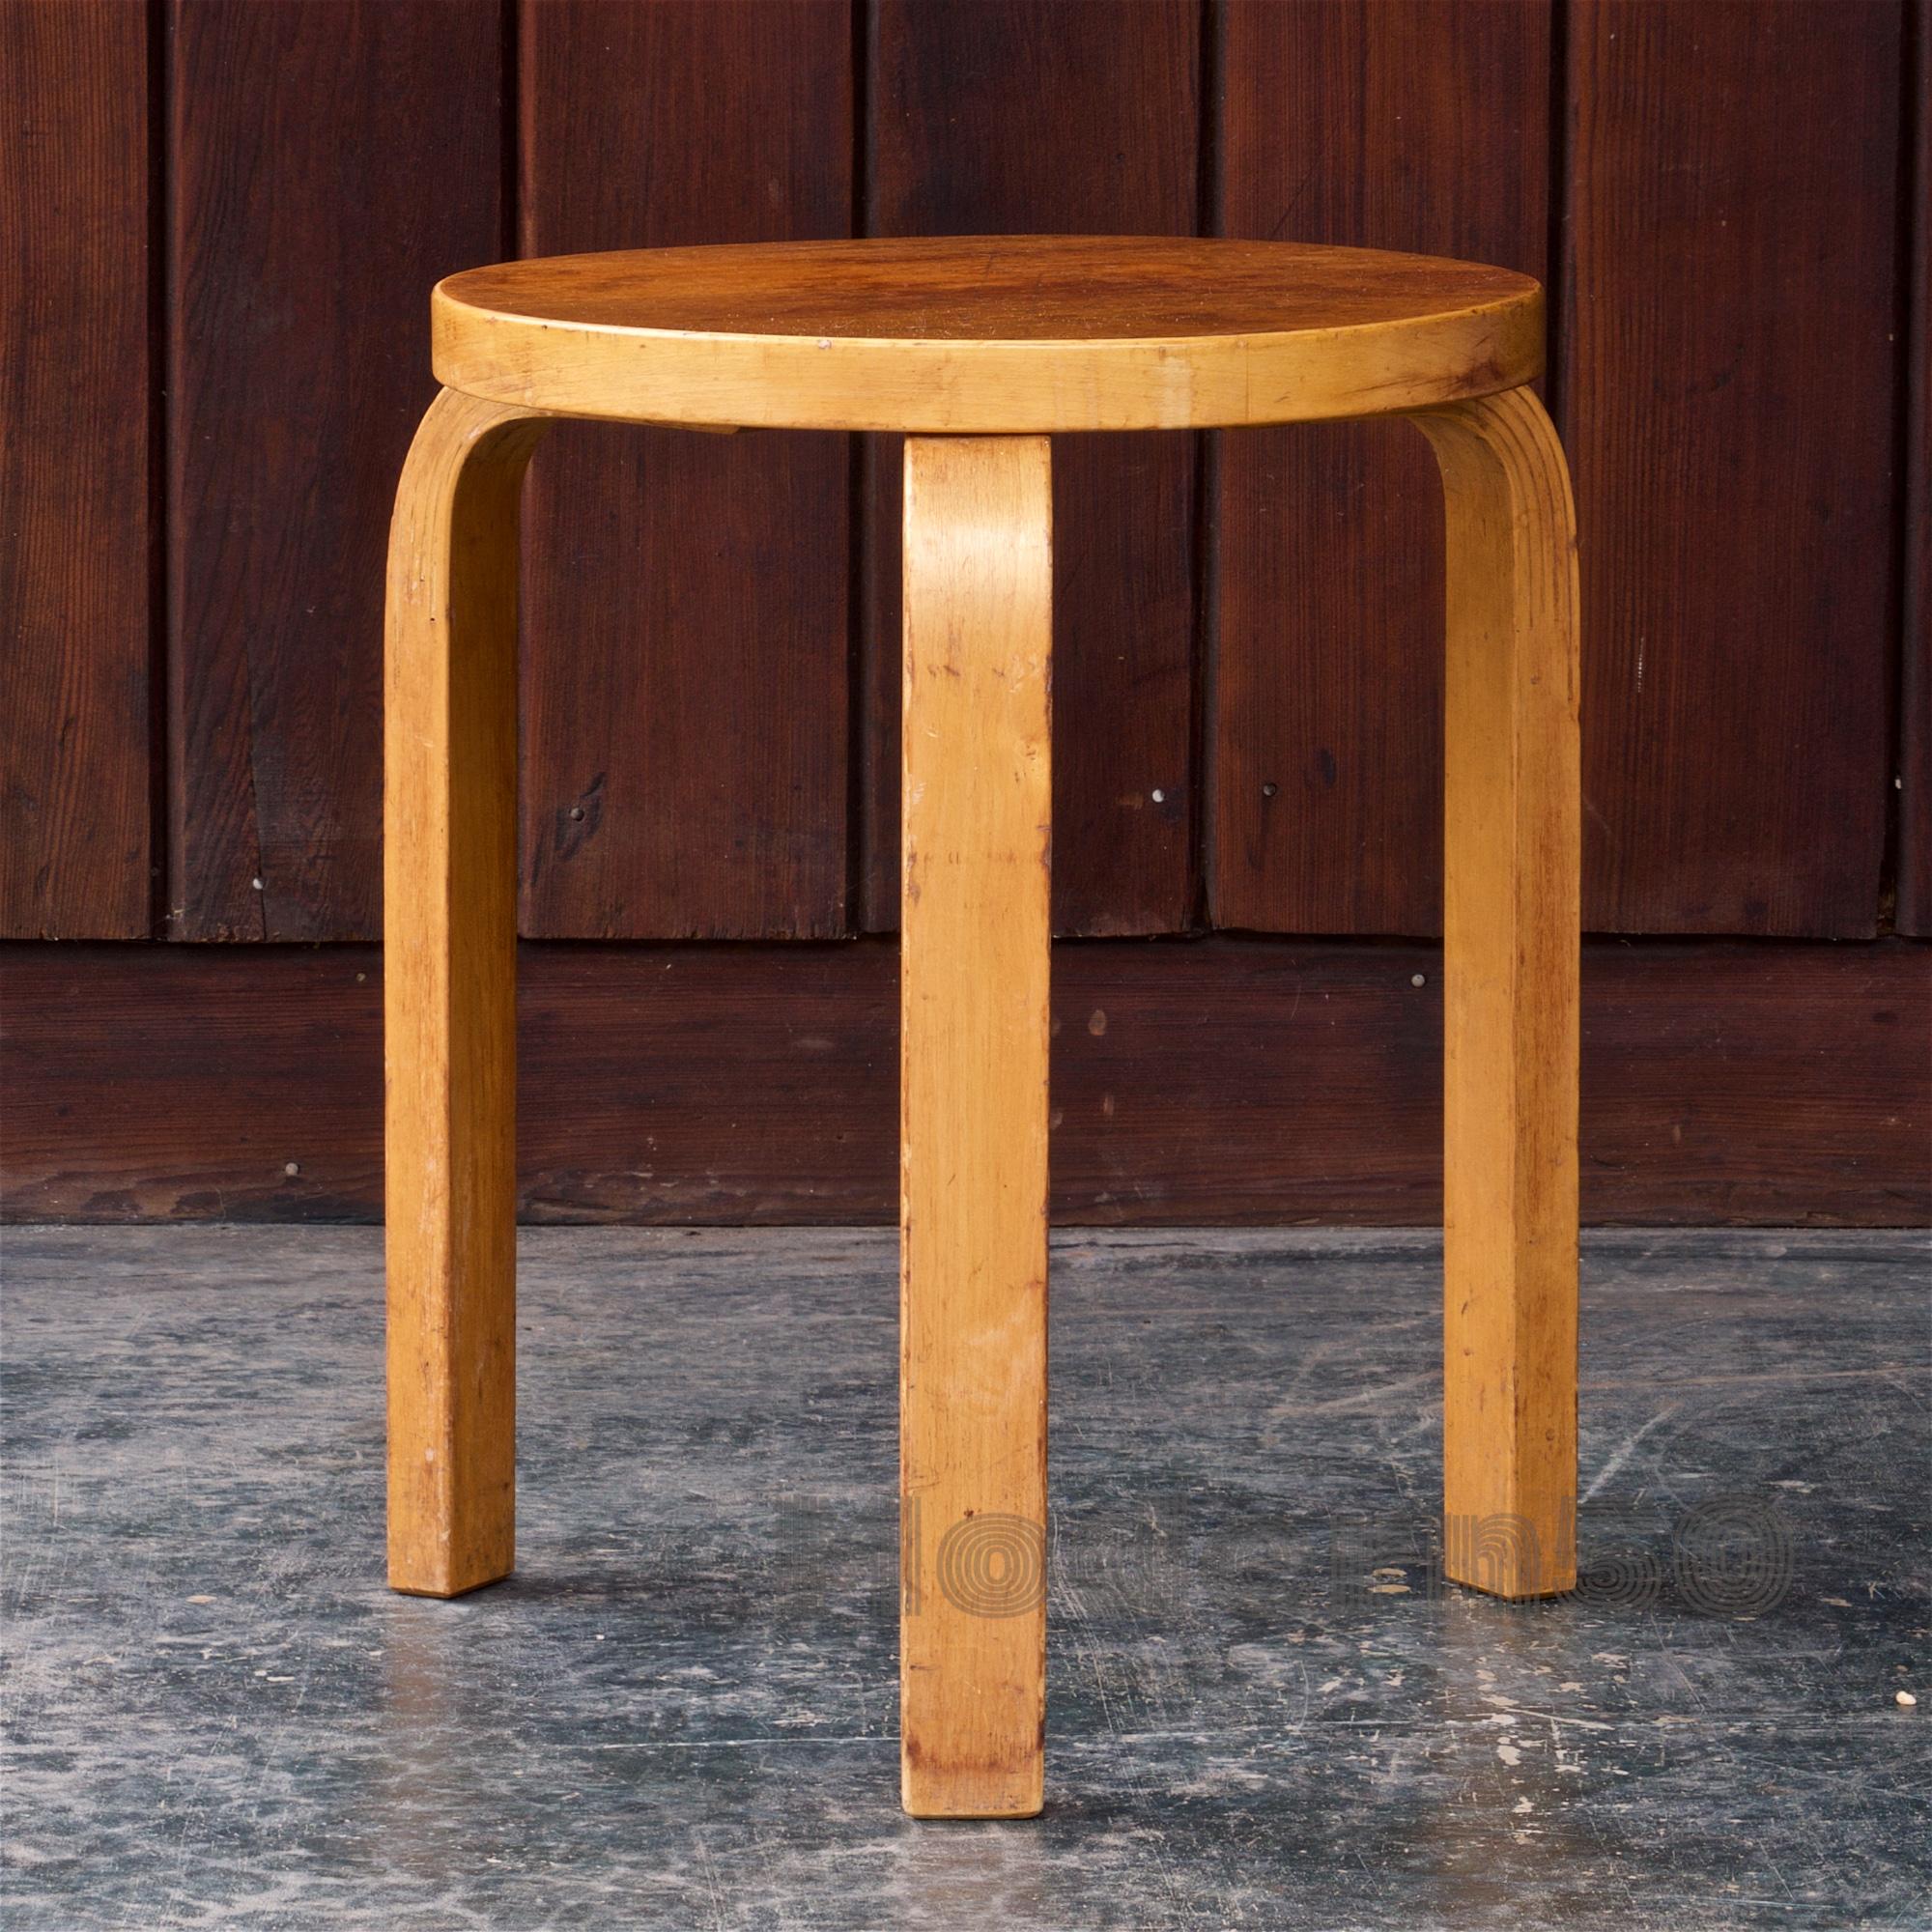 Wonderful and well used 1950s version of the model 60 Trileg stool. Strong and still good for gentle uses. Rare with teak surface. Legs bend out about 1 1/2 inches beyond stated top diameter.